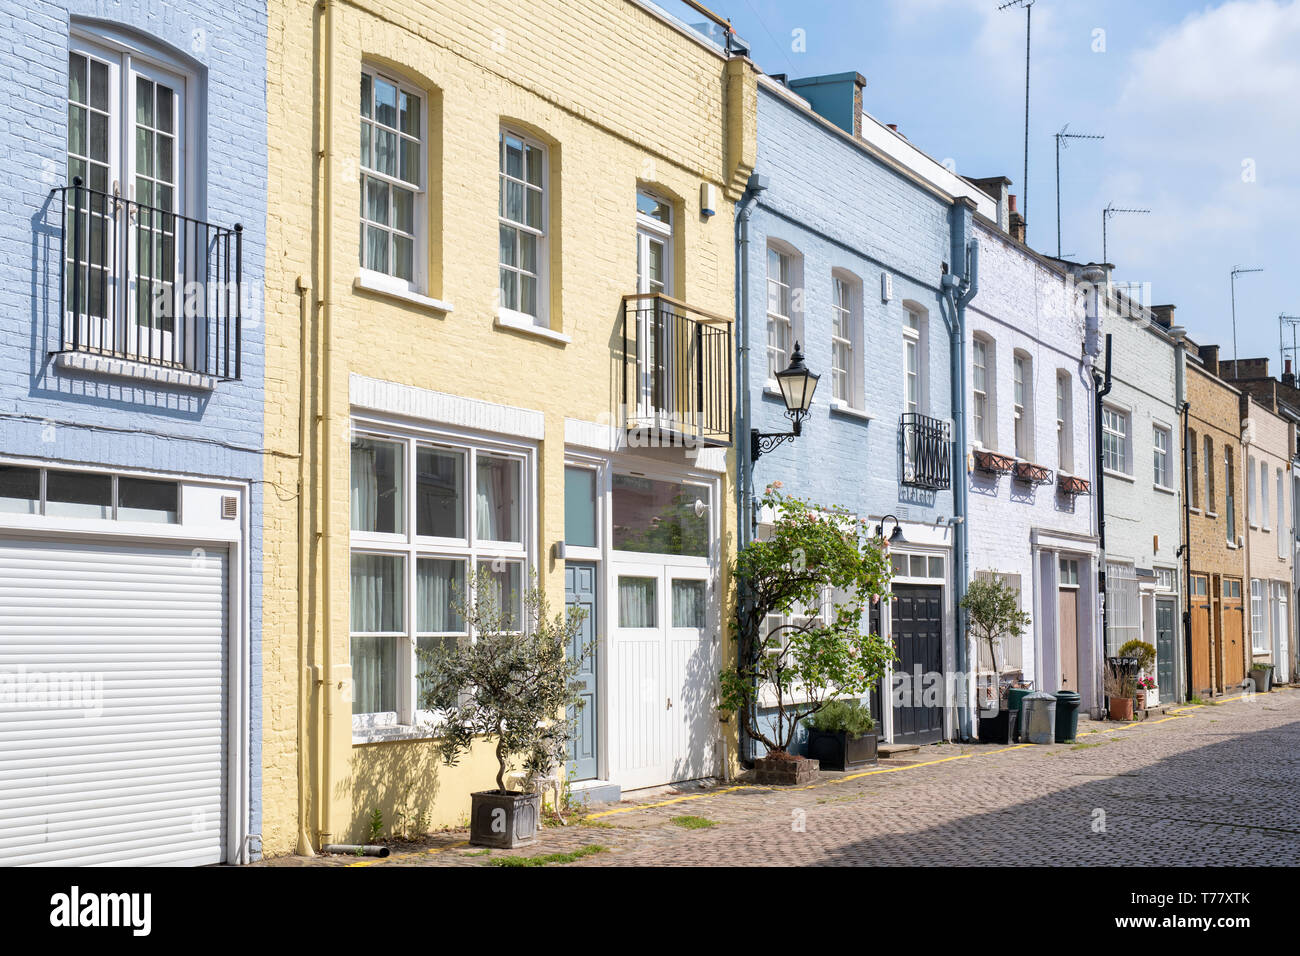 Colourful Houses and small trees and shrubs in containers in Princes Gate Mews, Kensington, London, England Stock Photo